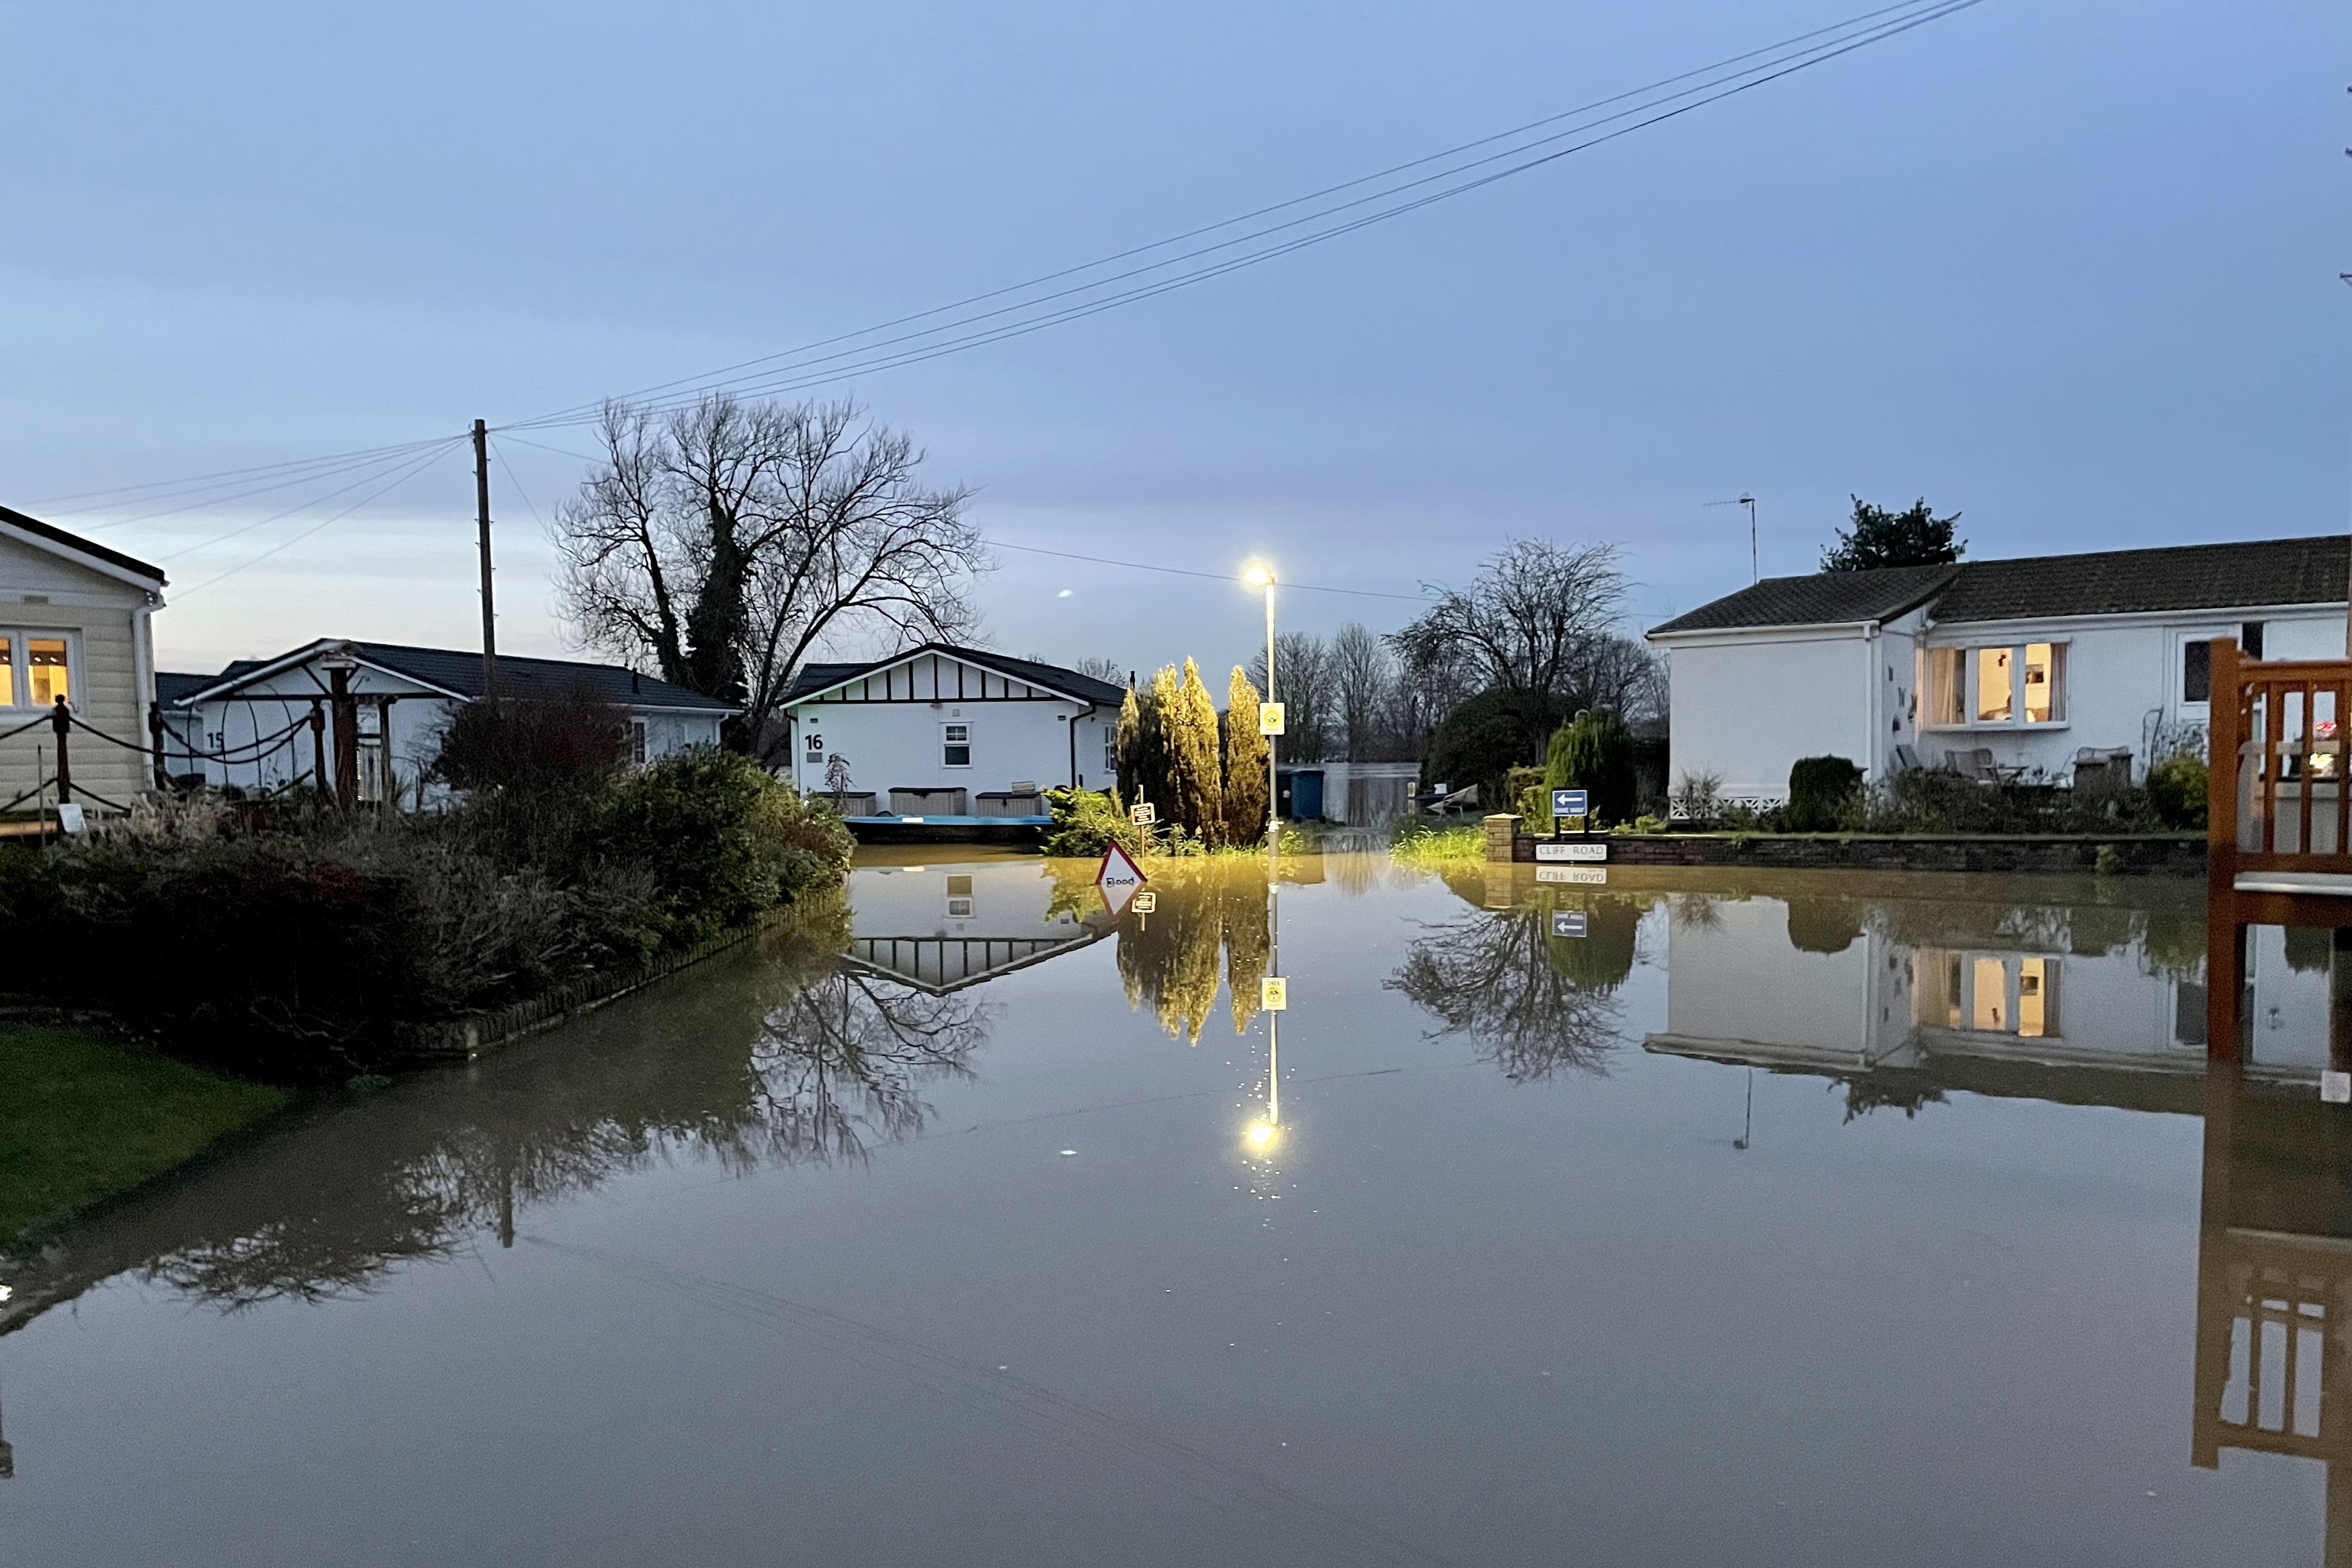 A major incident was declared amid widespread flooding in the Midlands on Thursday (Callum Parke/PA)